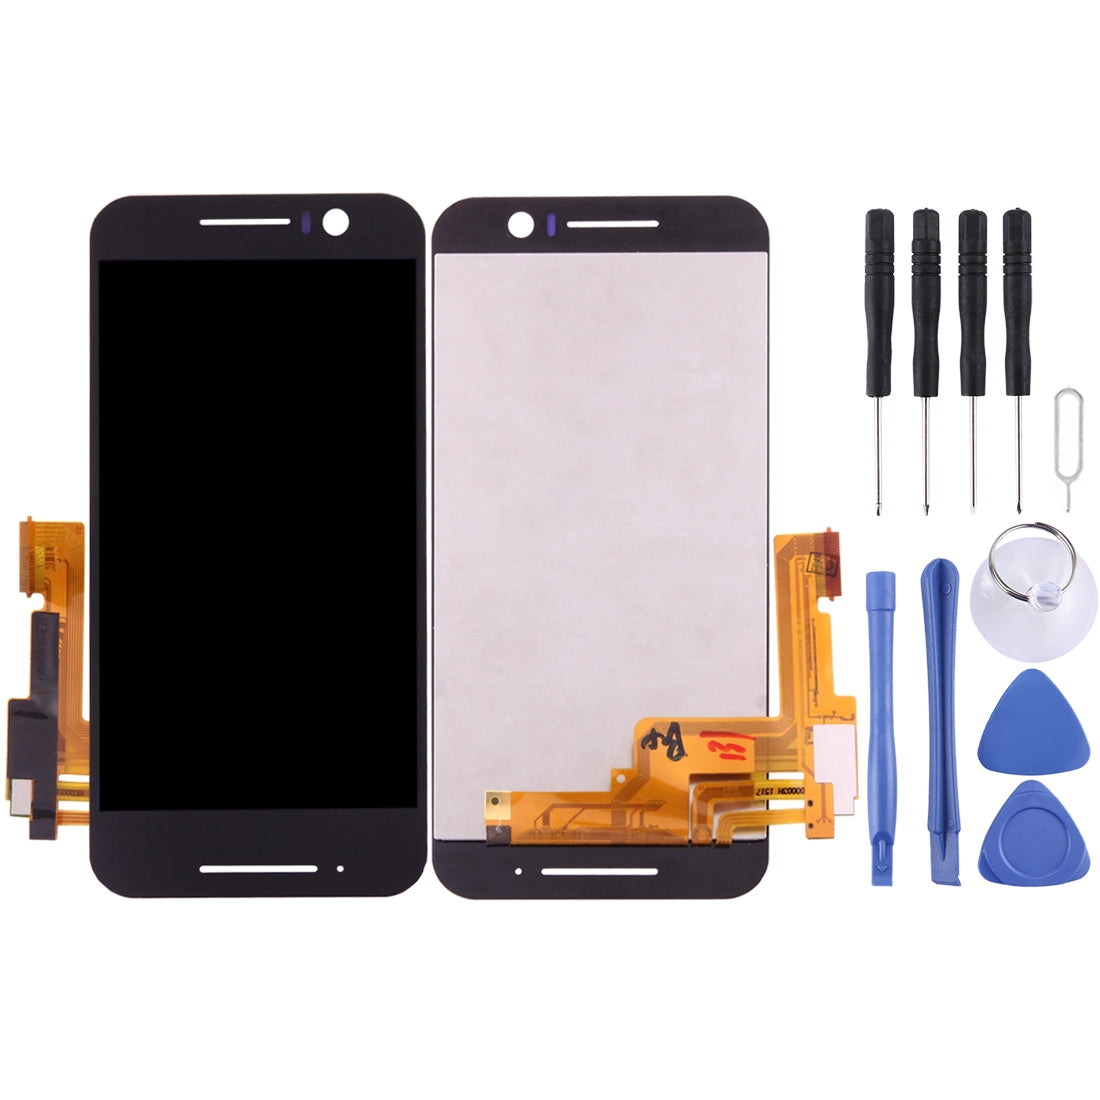 LCD Screen + Touch Digitizer HTC One S9 Black